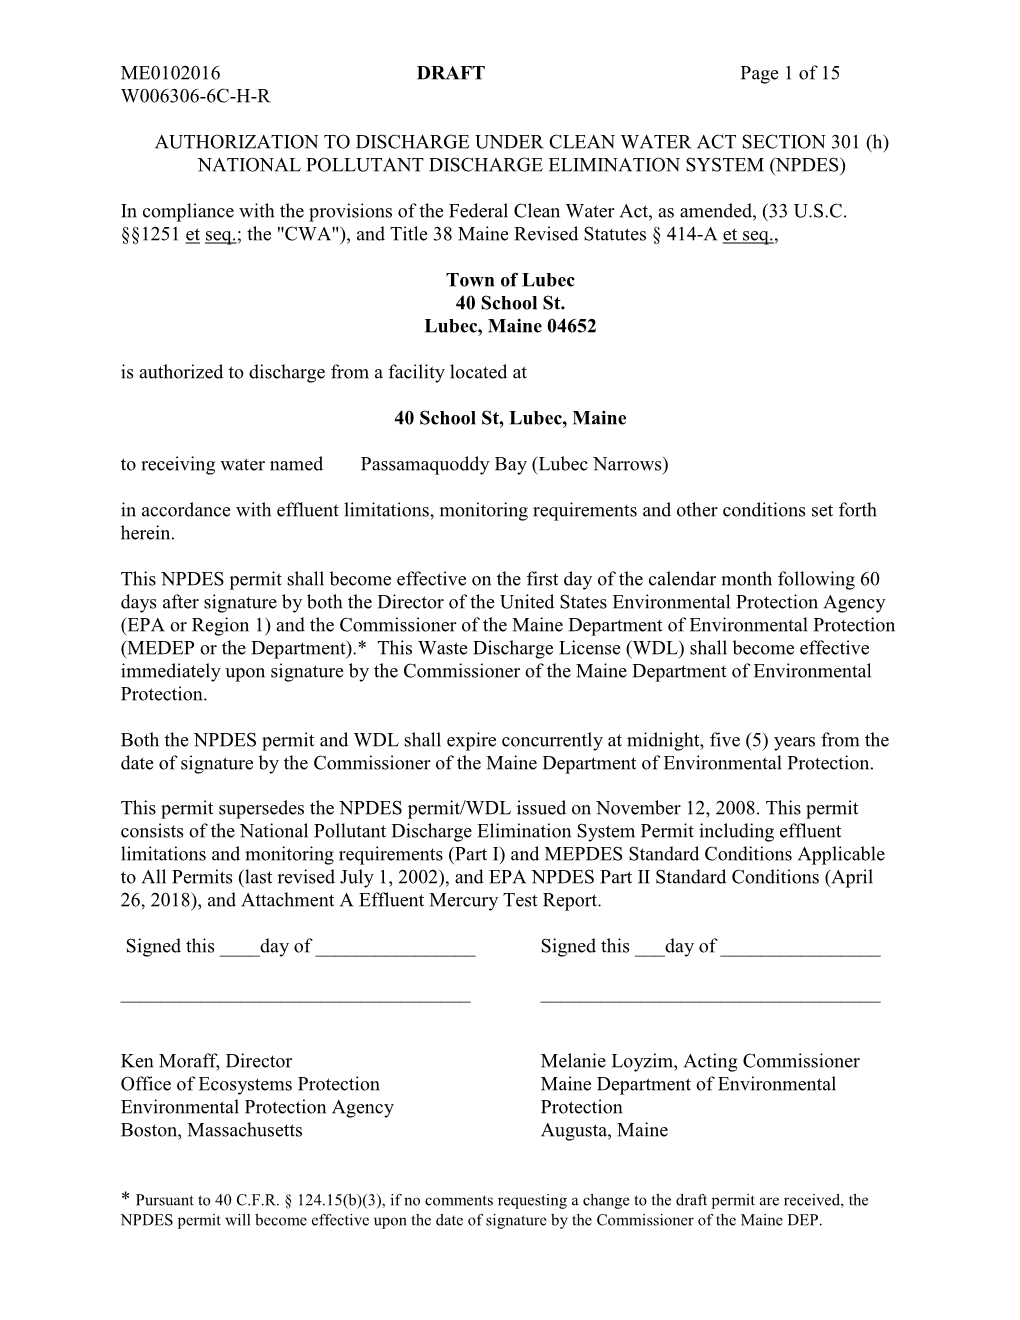 Town of Lubec Wastewater Treatment Facility, ME0102016, Draft Permit